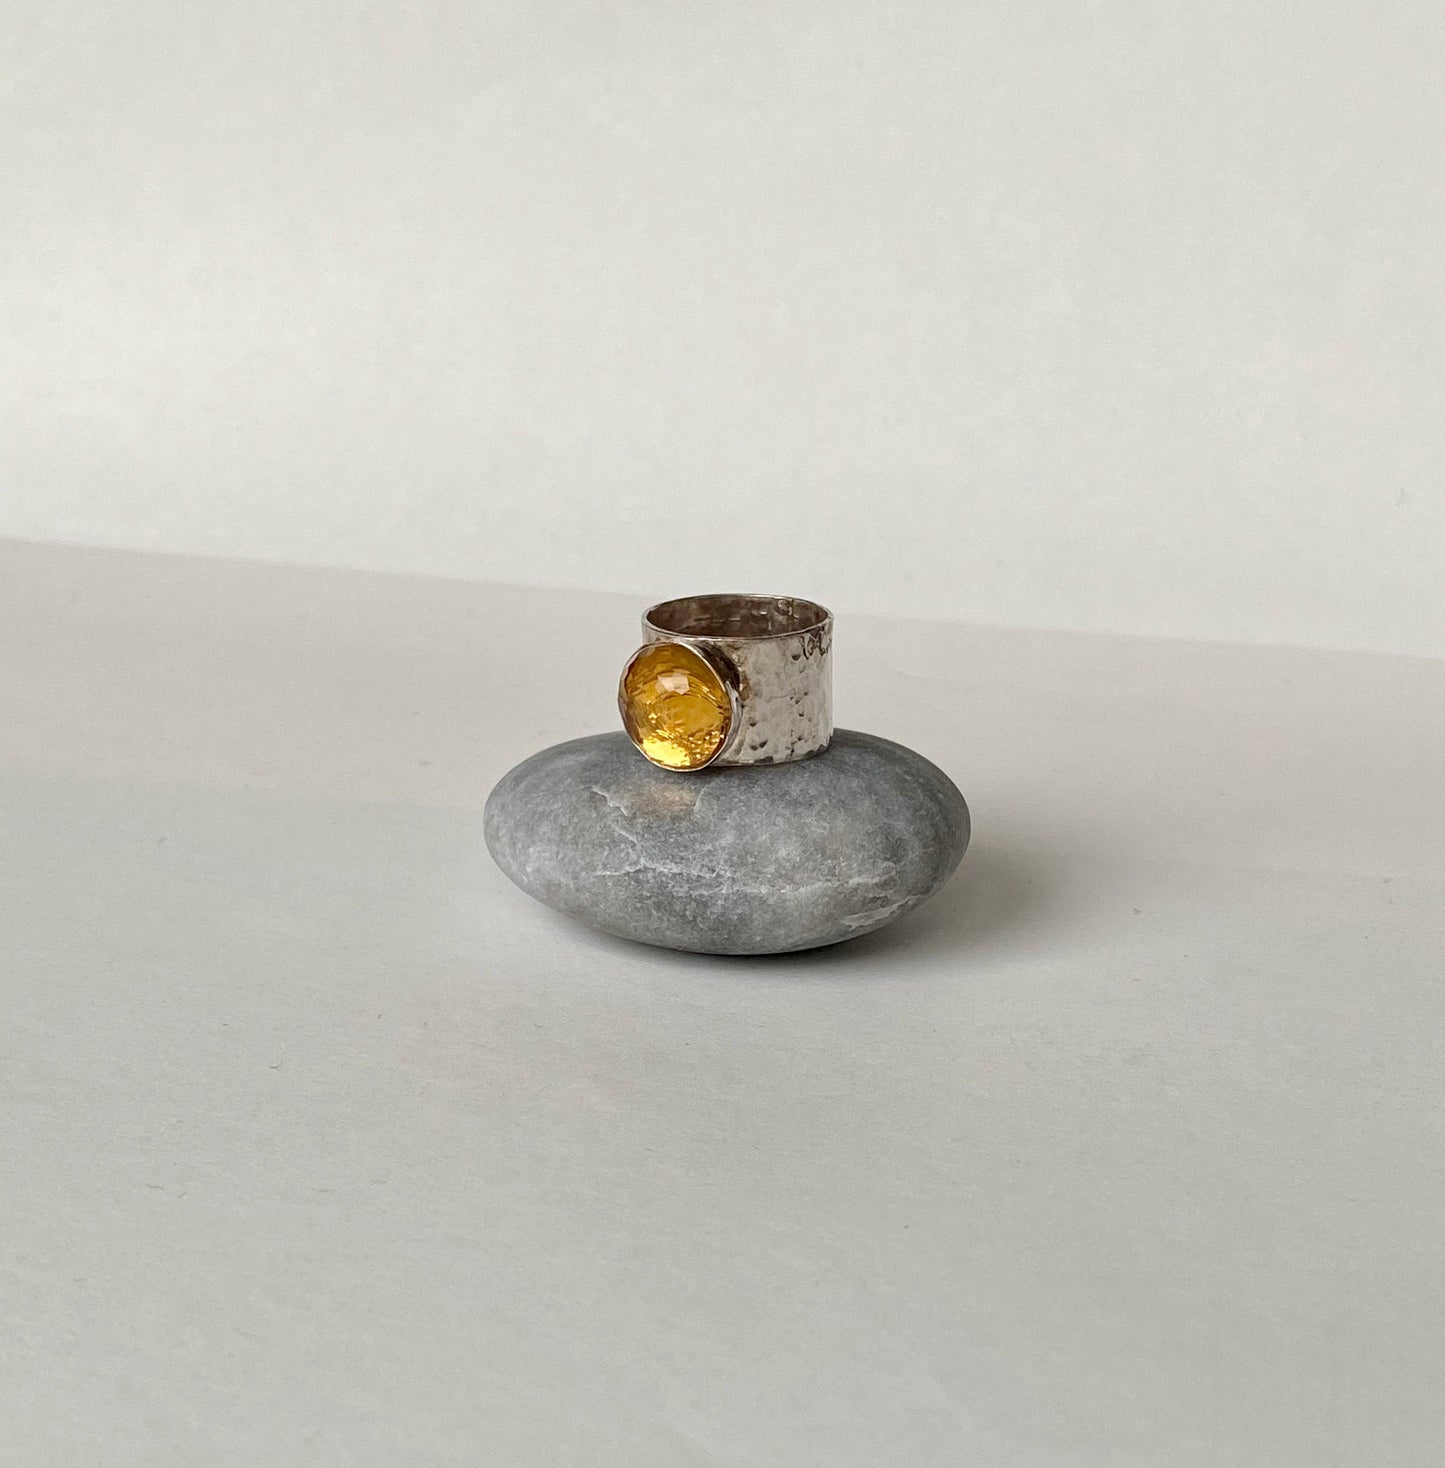 Beautiful size 5 3/4 citrine stone  sterling silver ring. 5 3/4" ring size.